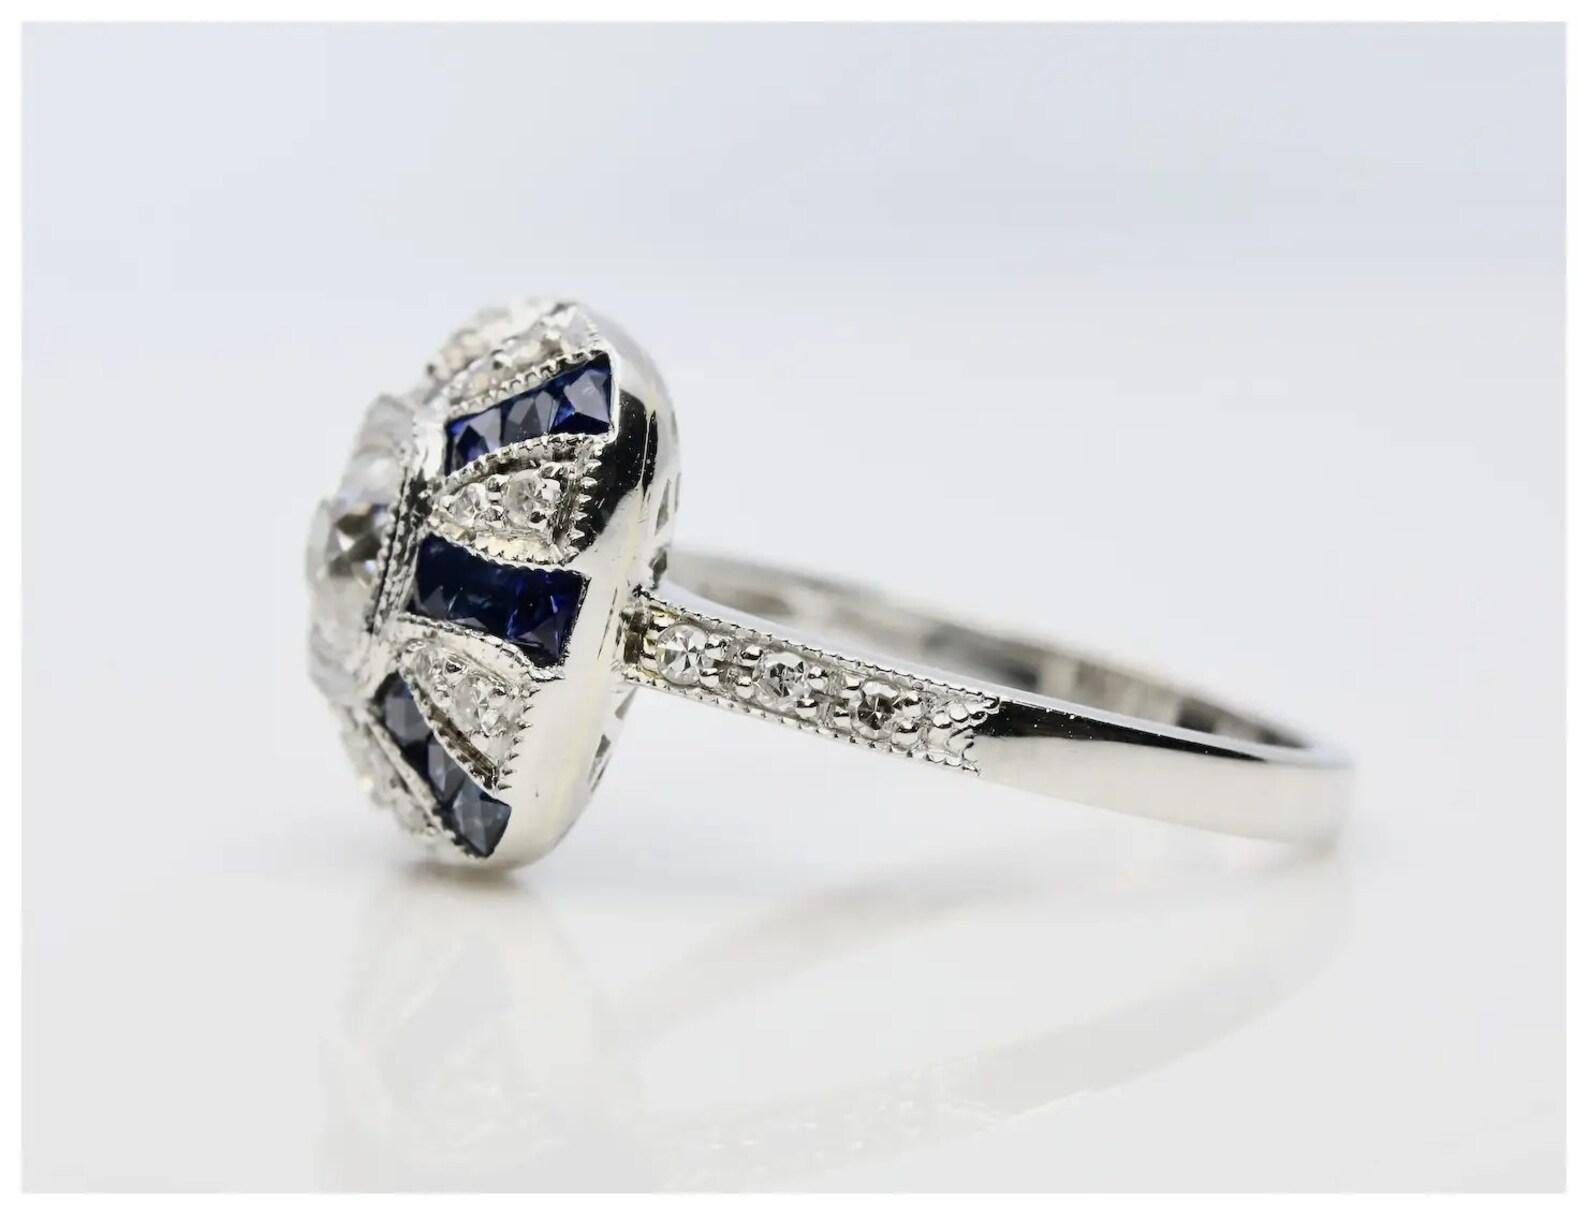 Dramatic Art Deco Diamond & French Cut Sapphire Ring in Platinum In Good Condition For Sale In Boston, MA